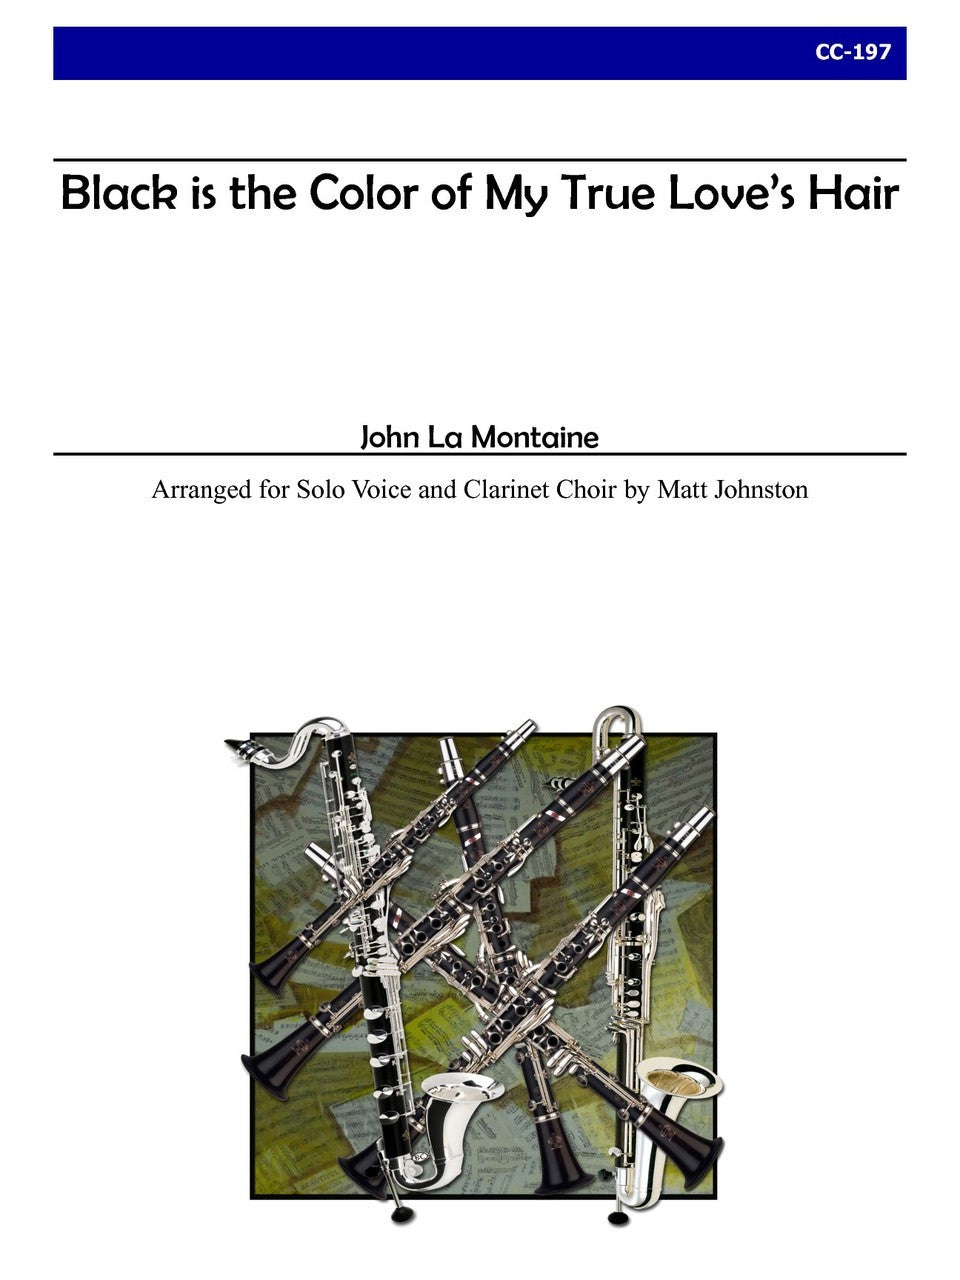 La Montaine - Black is the Color of My True Love's Hair for Solo Voice and Clarinet Choir